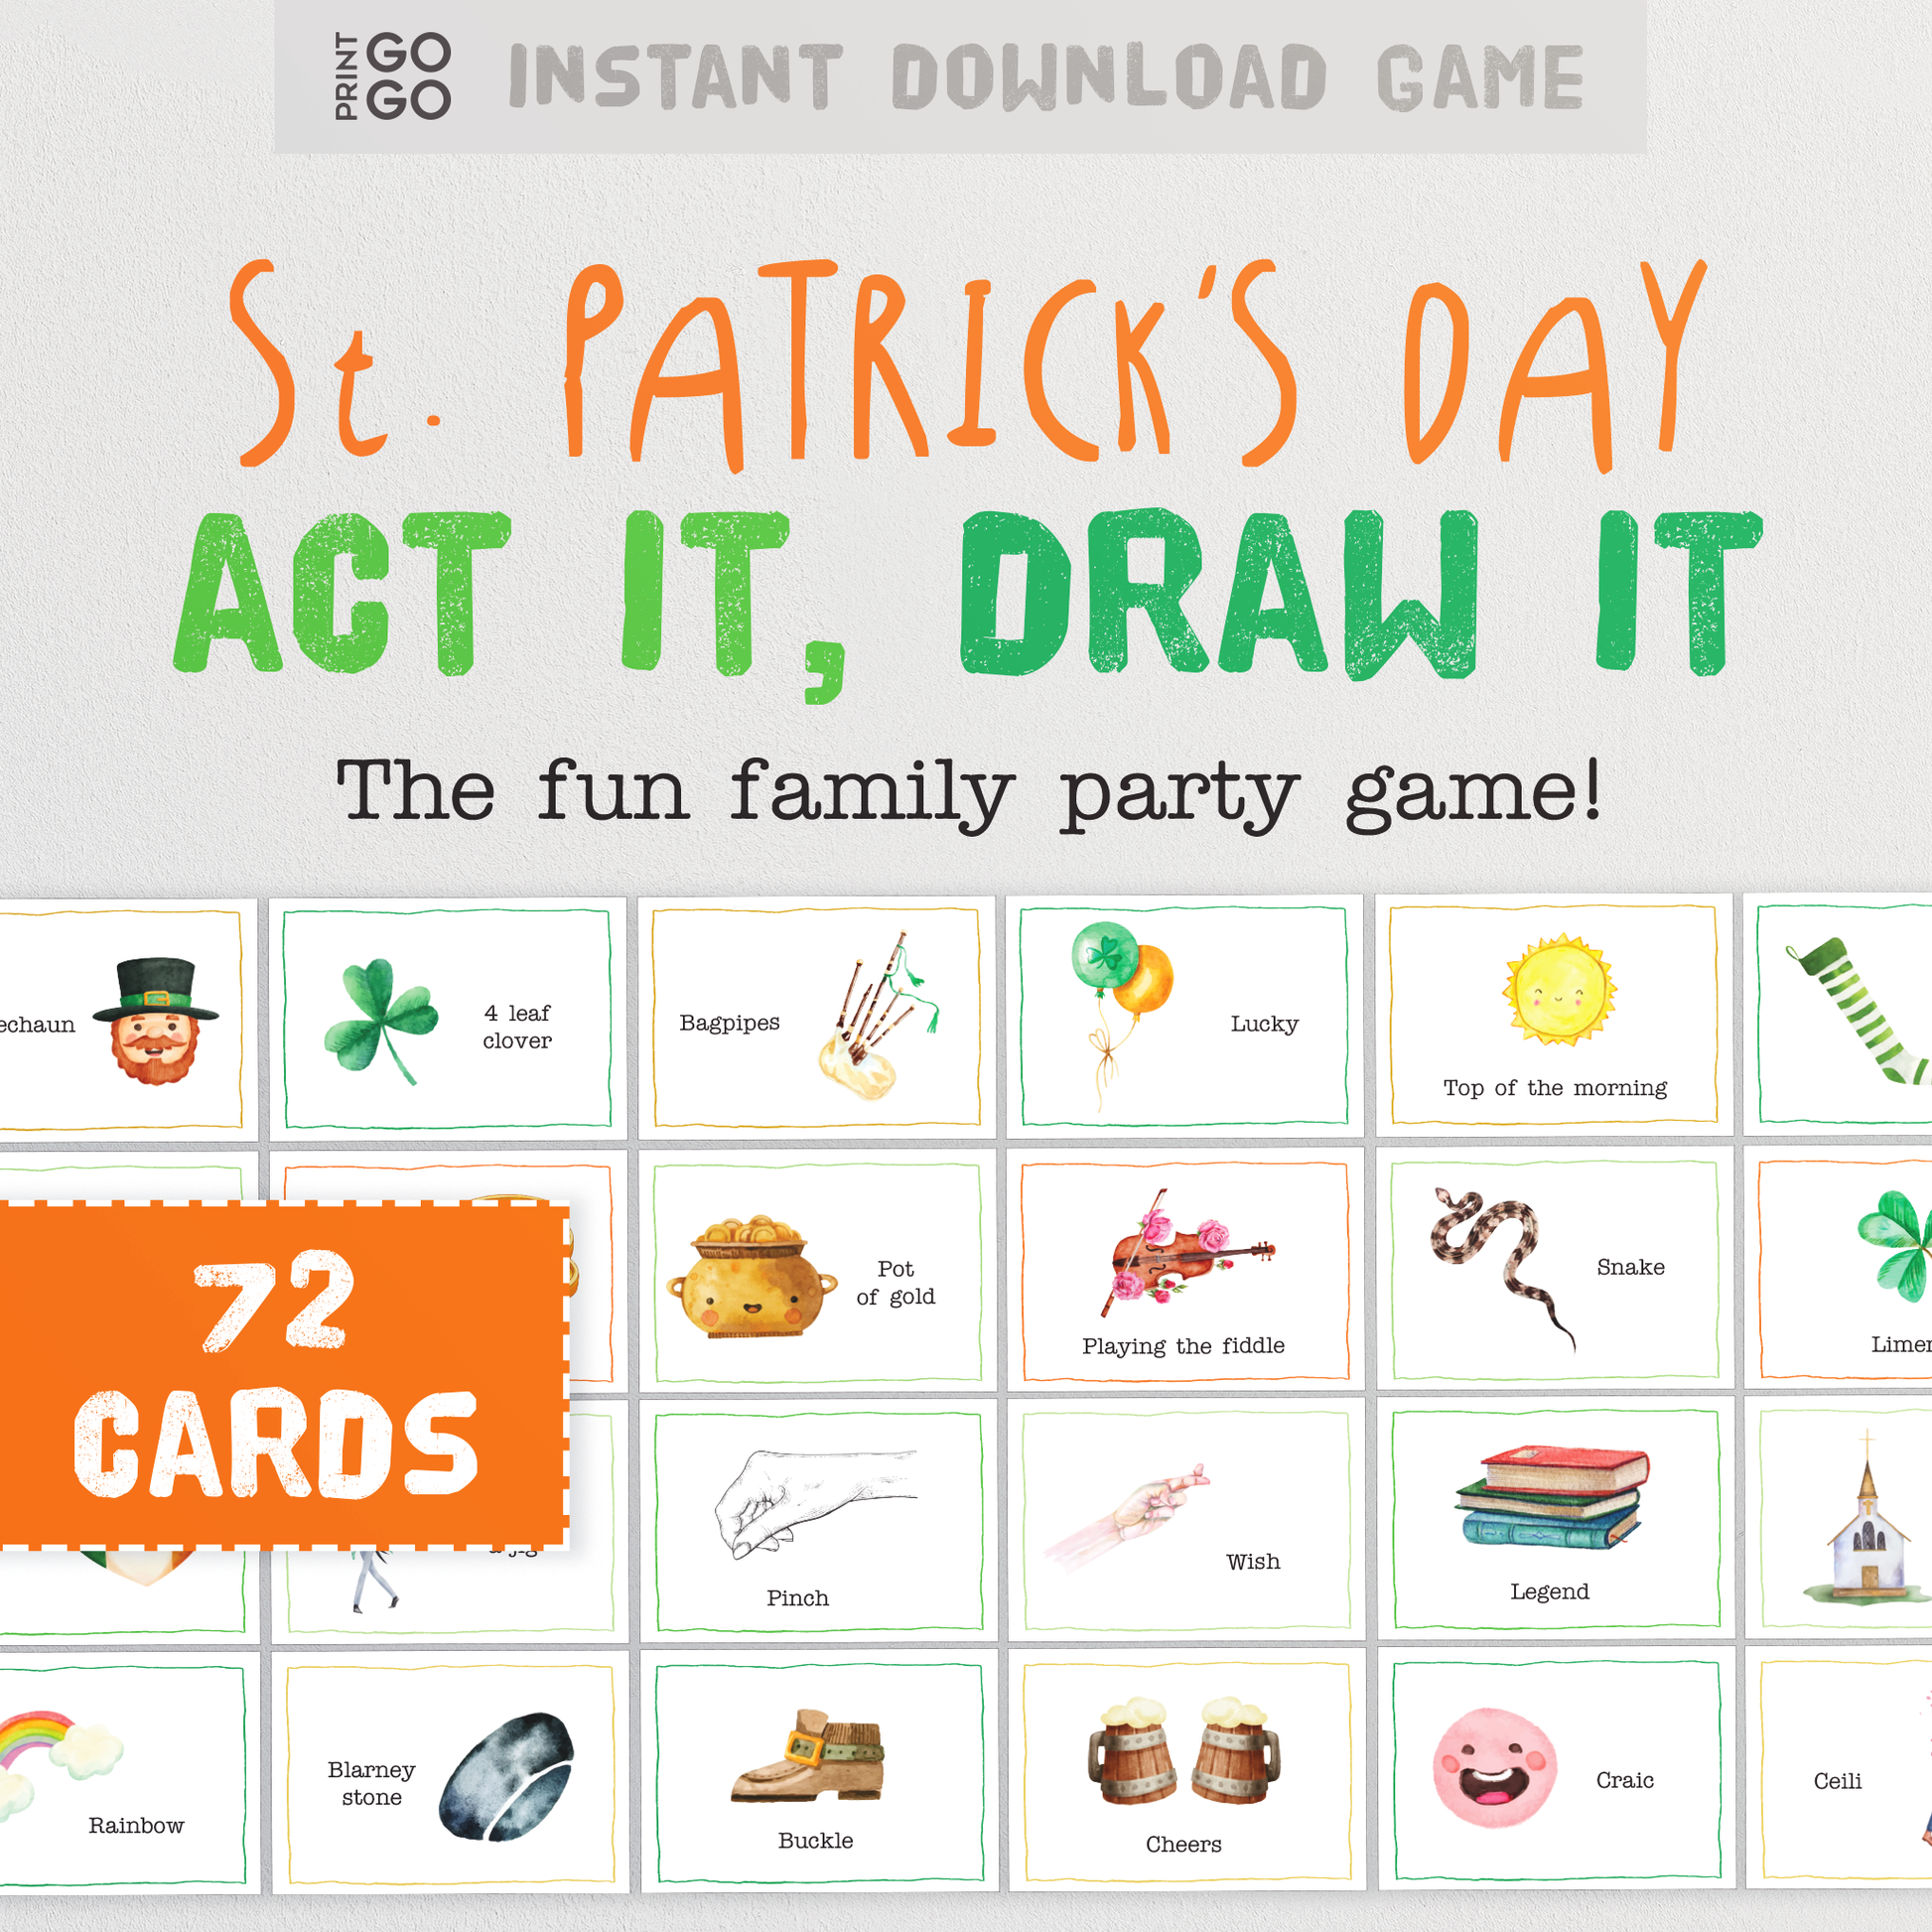 St. Patricks Day Act It, Draw It - The Family Party Game of Acting Out, Drawing and Guessing Phrases | Paddy's Day Family Charades Games